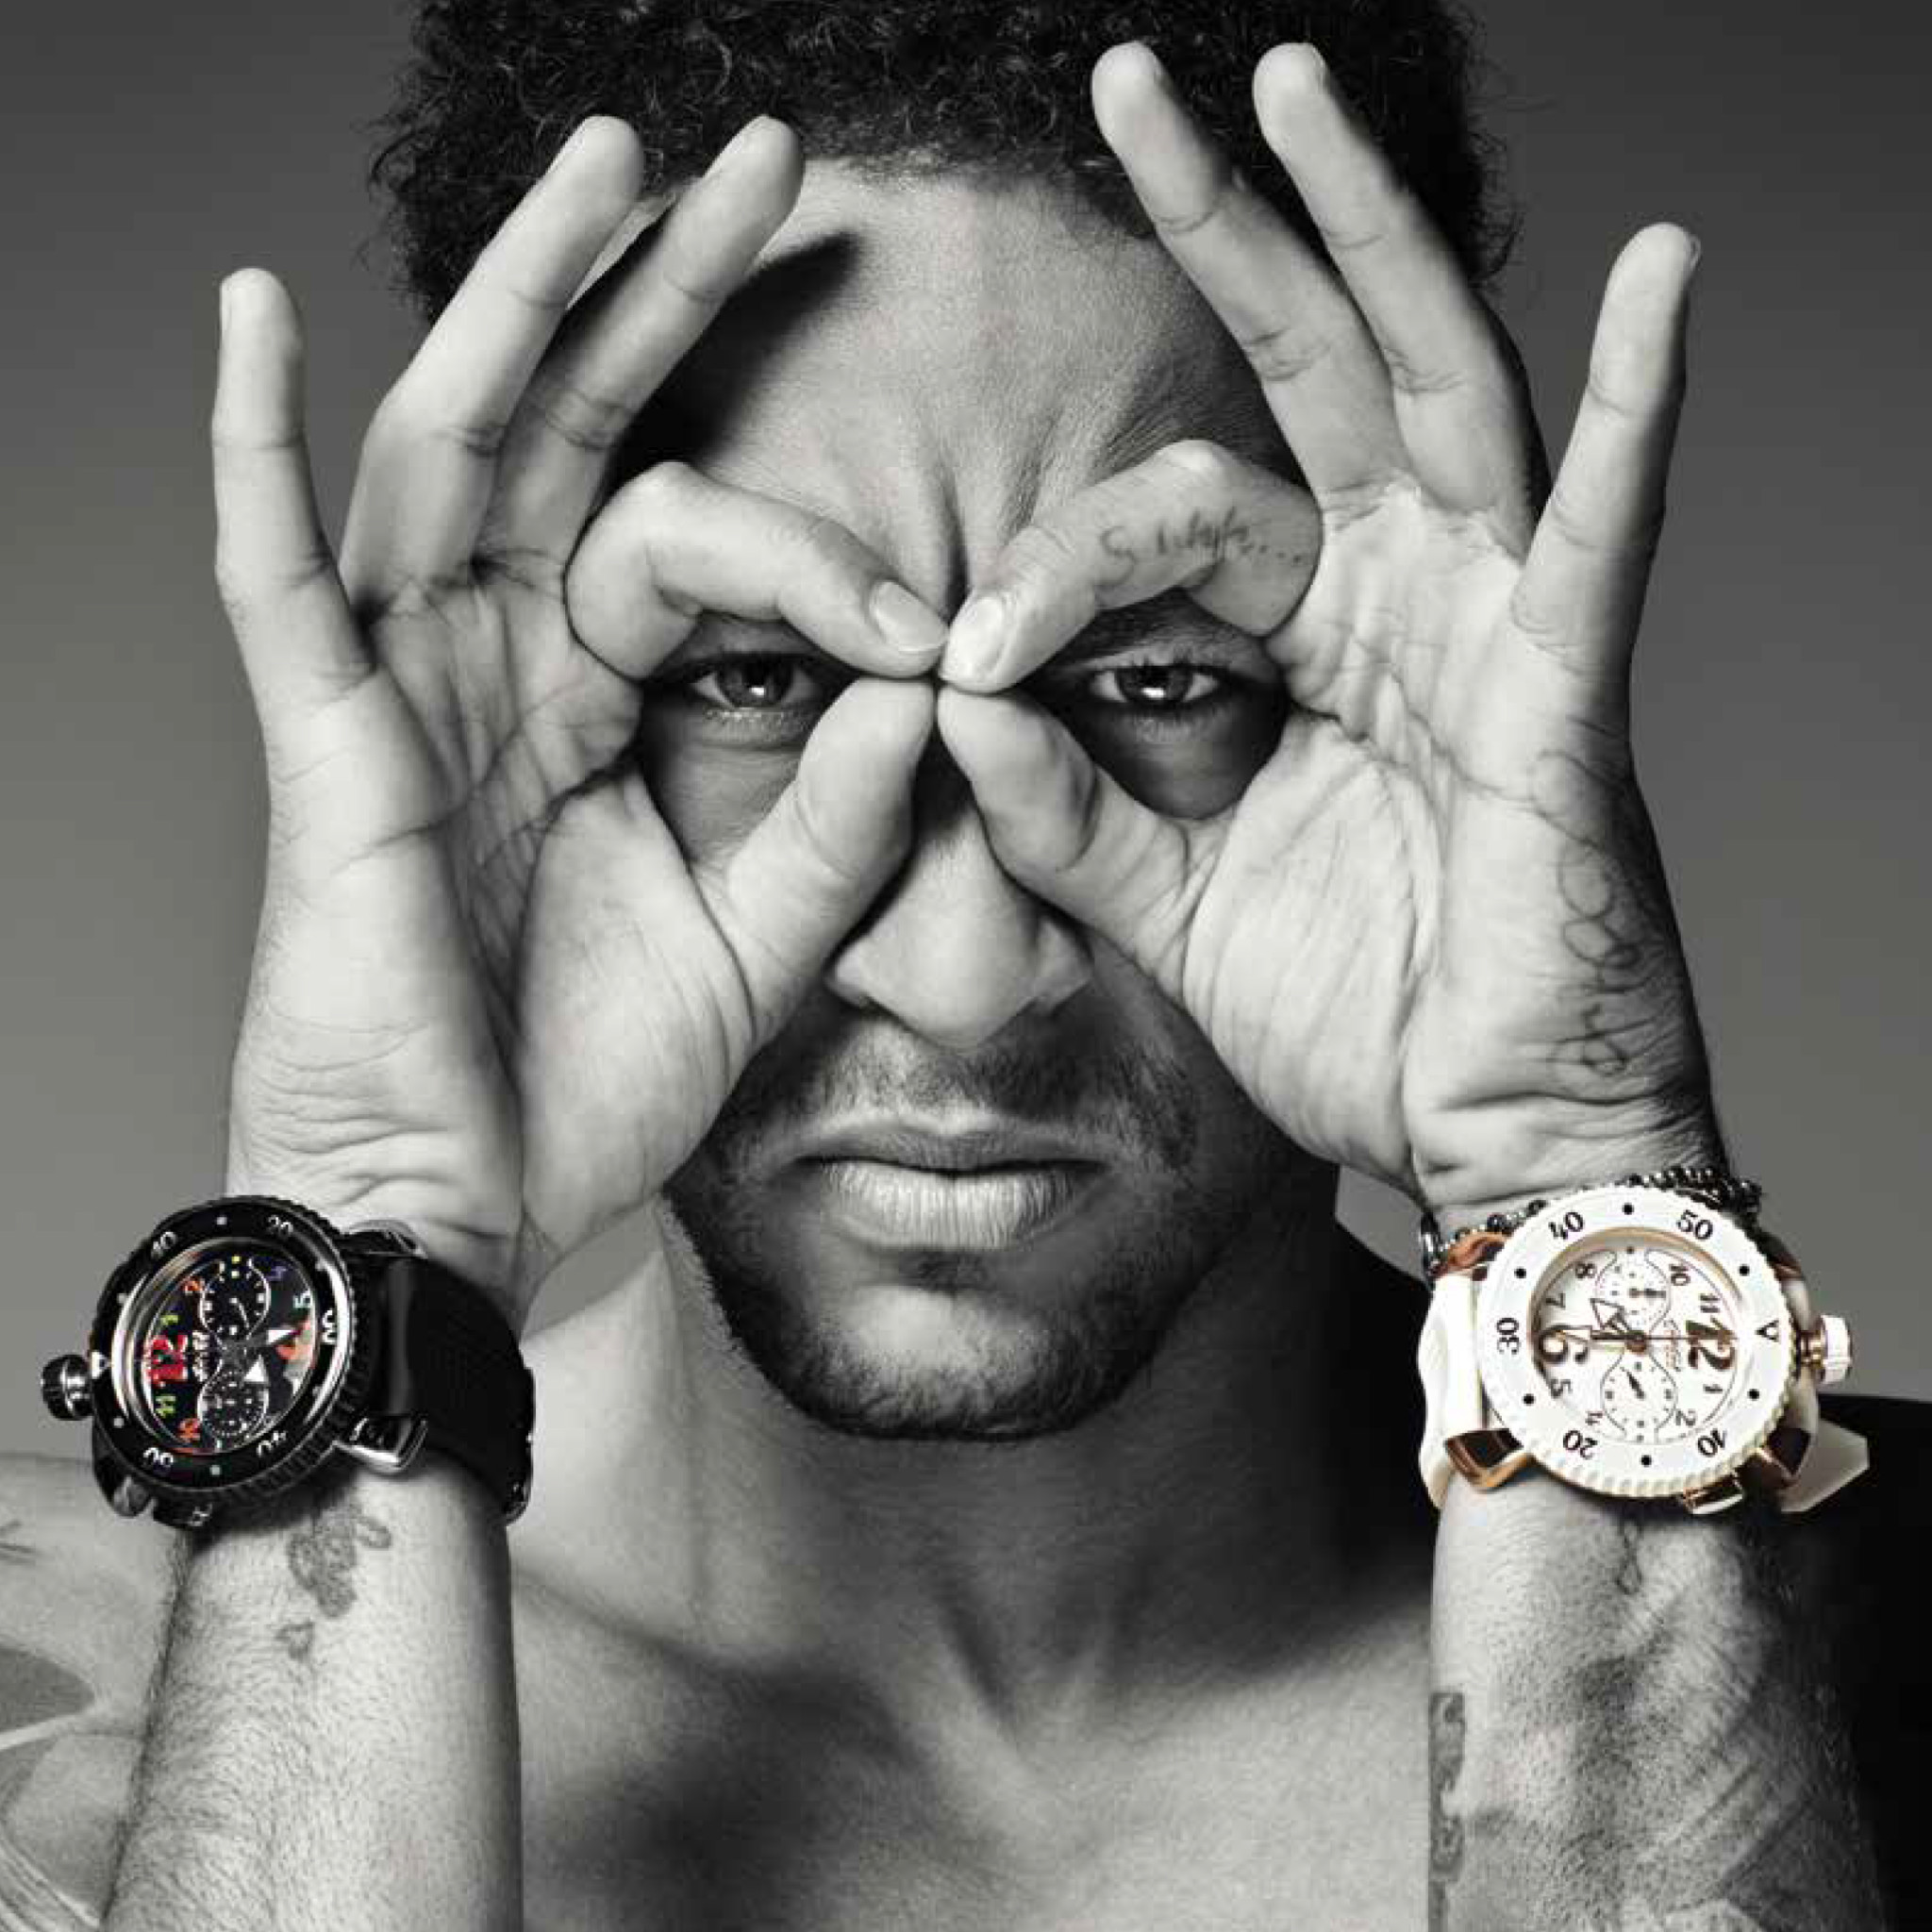 Neymar, who could be playing in the premier league next season, is a face for gaga milano.